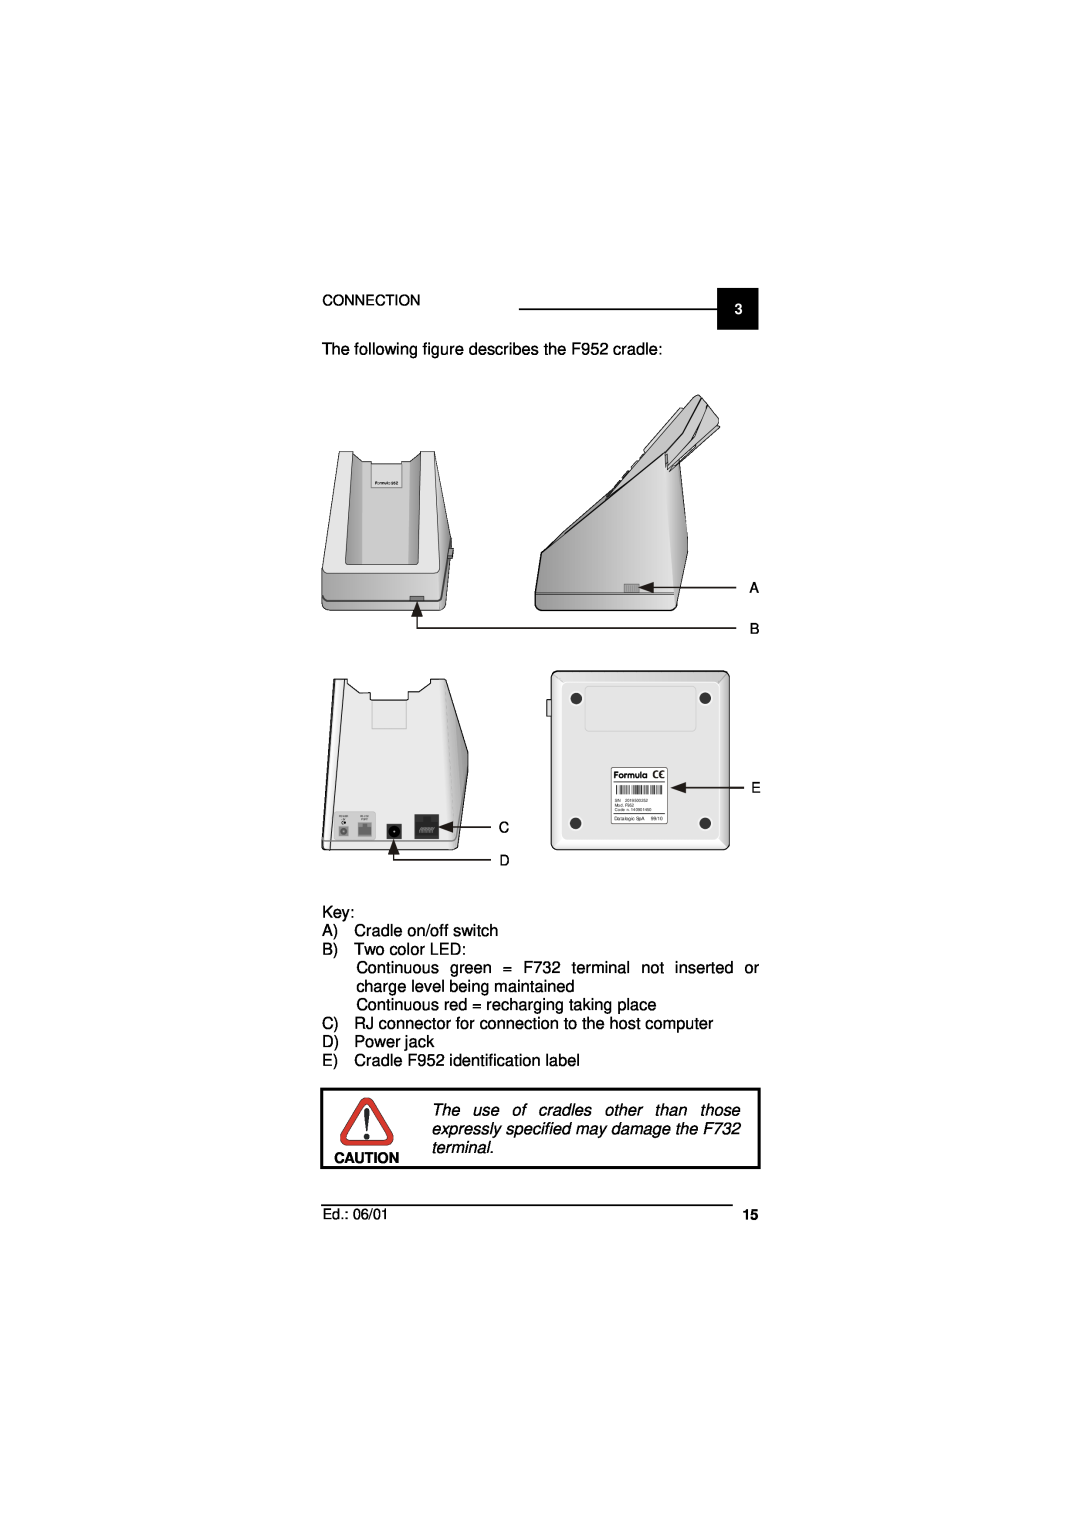 Datalogic Scanning F732 user manual The following figure describes the F952 cradle 